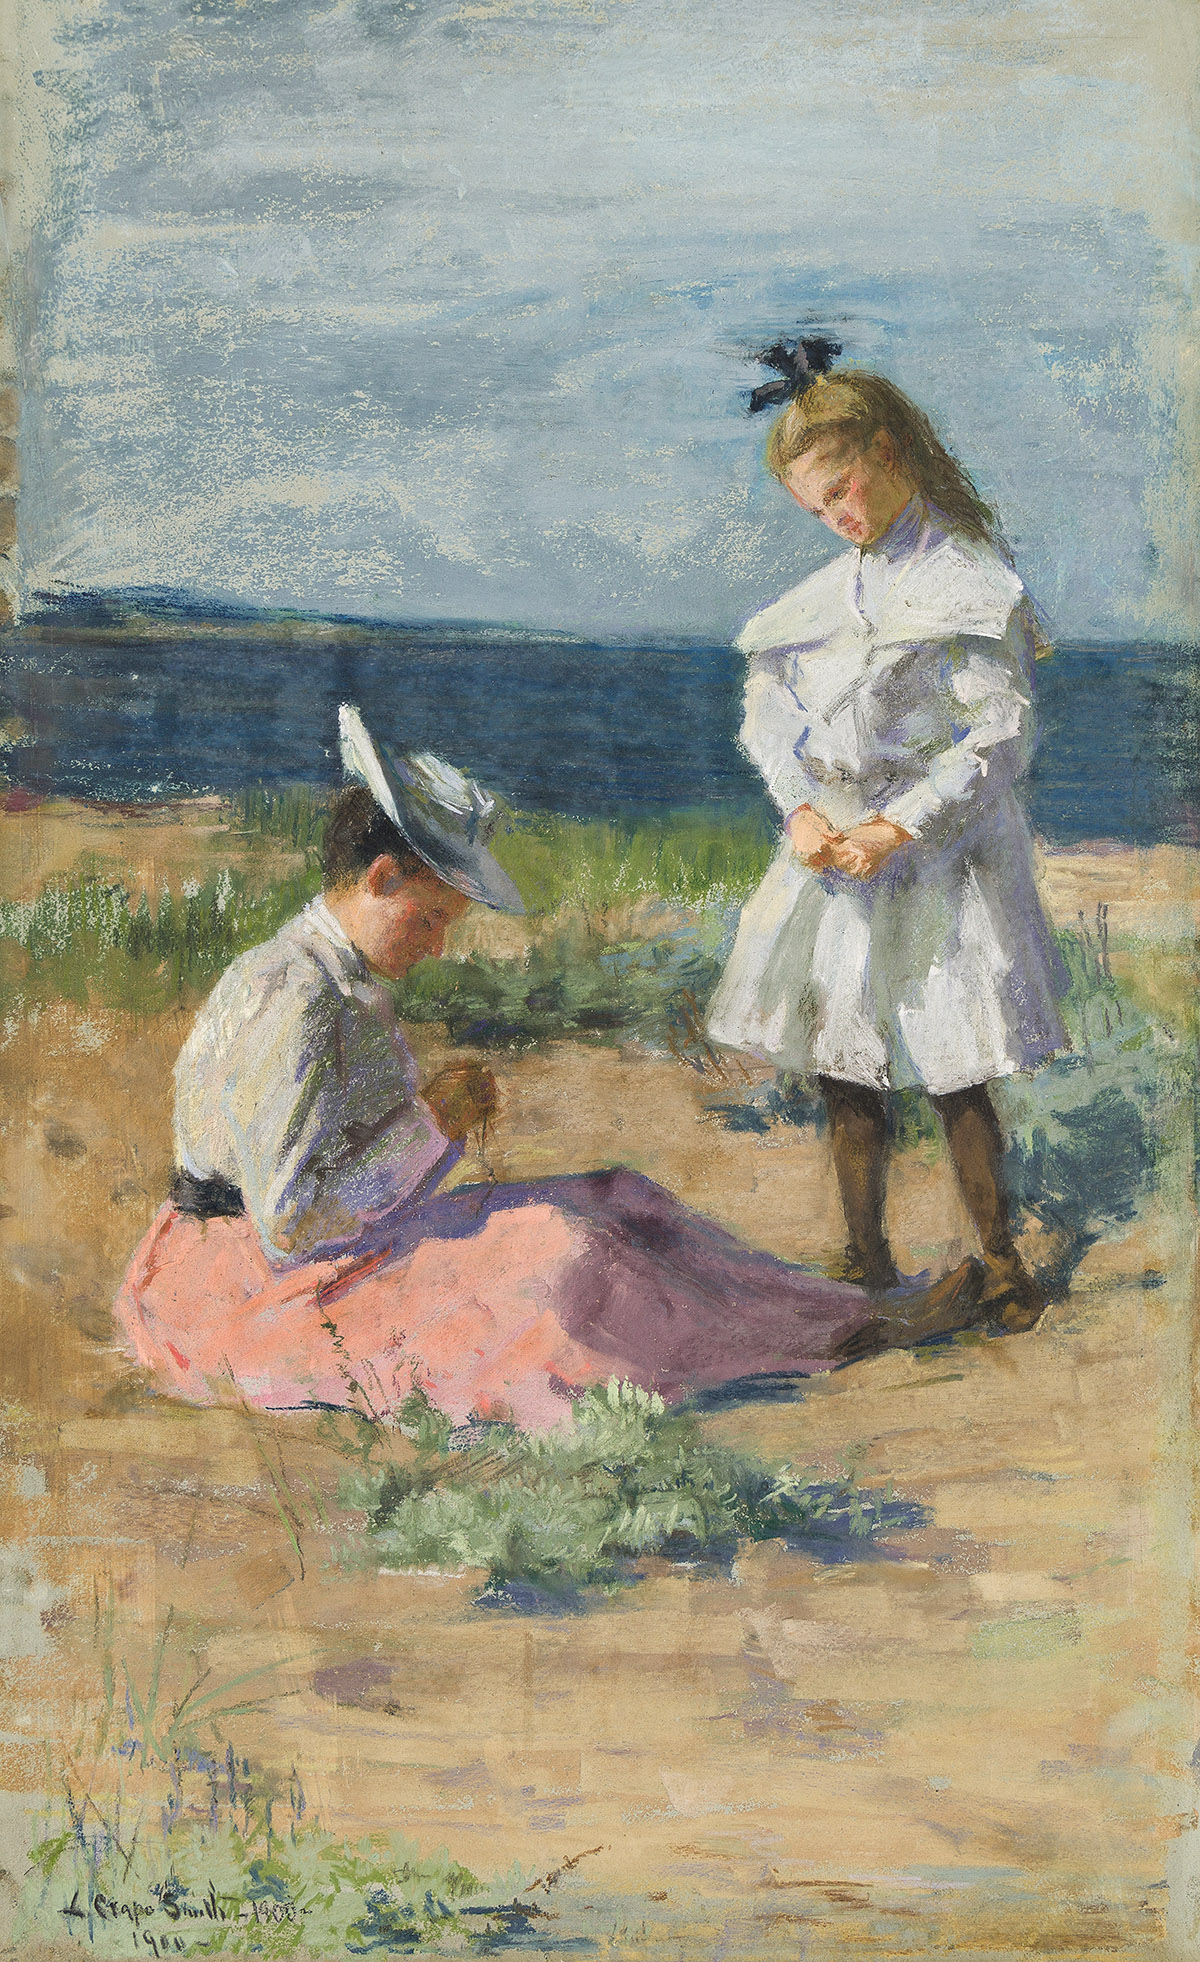 LETTA CRAPO-SMITH A Seated Woman and Child at the Beach.